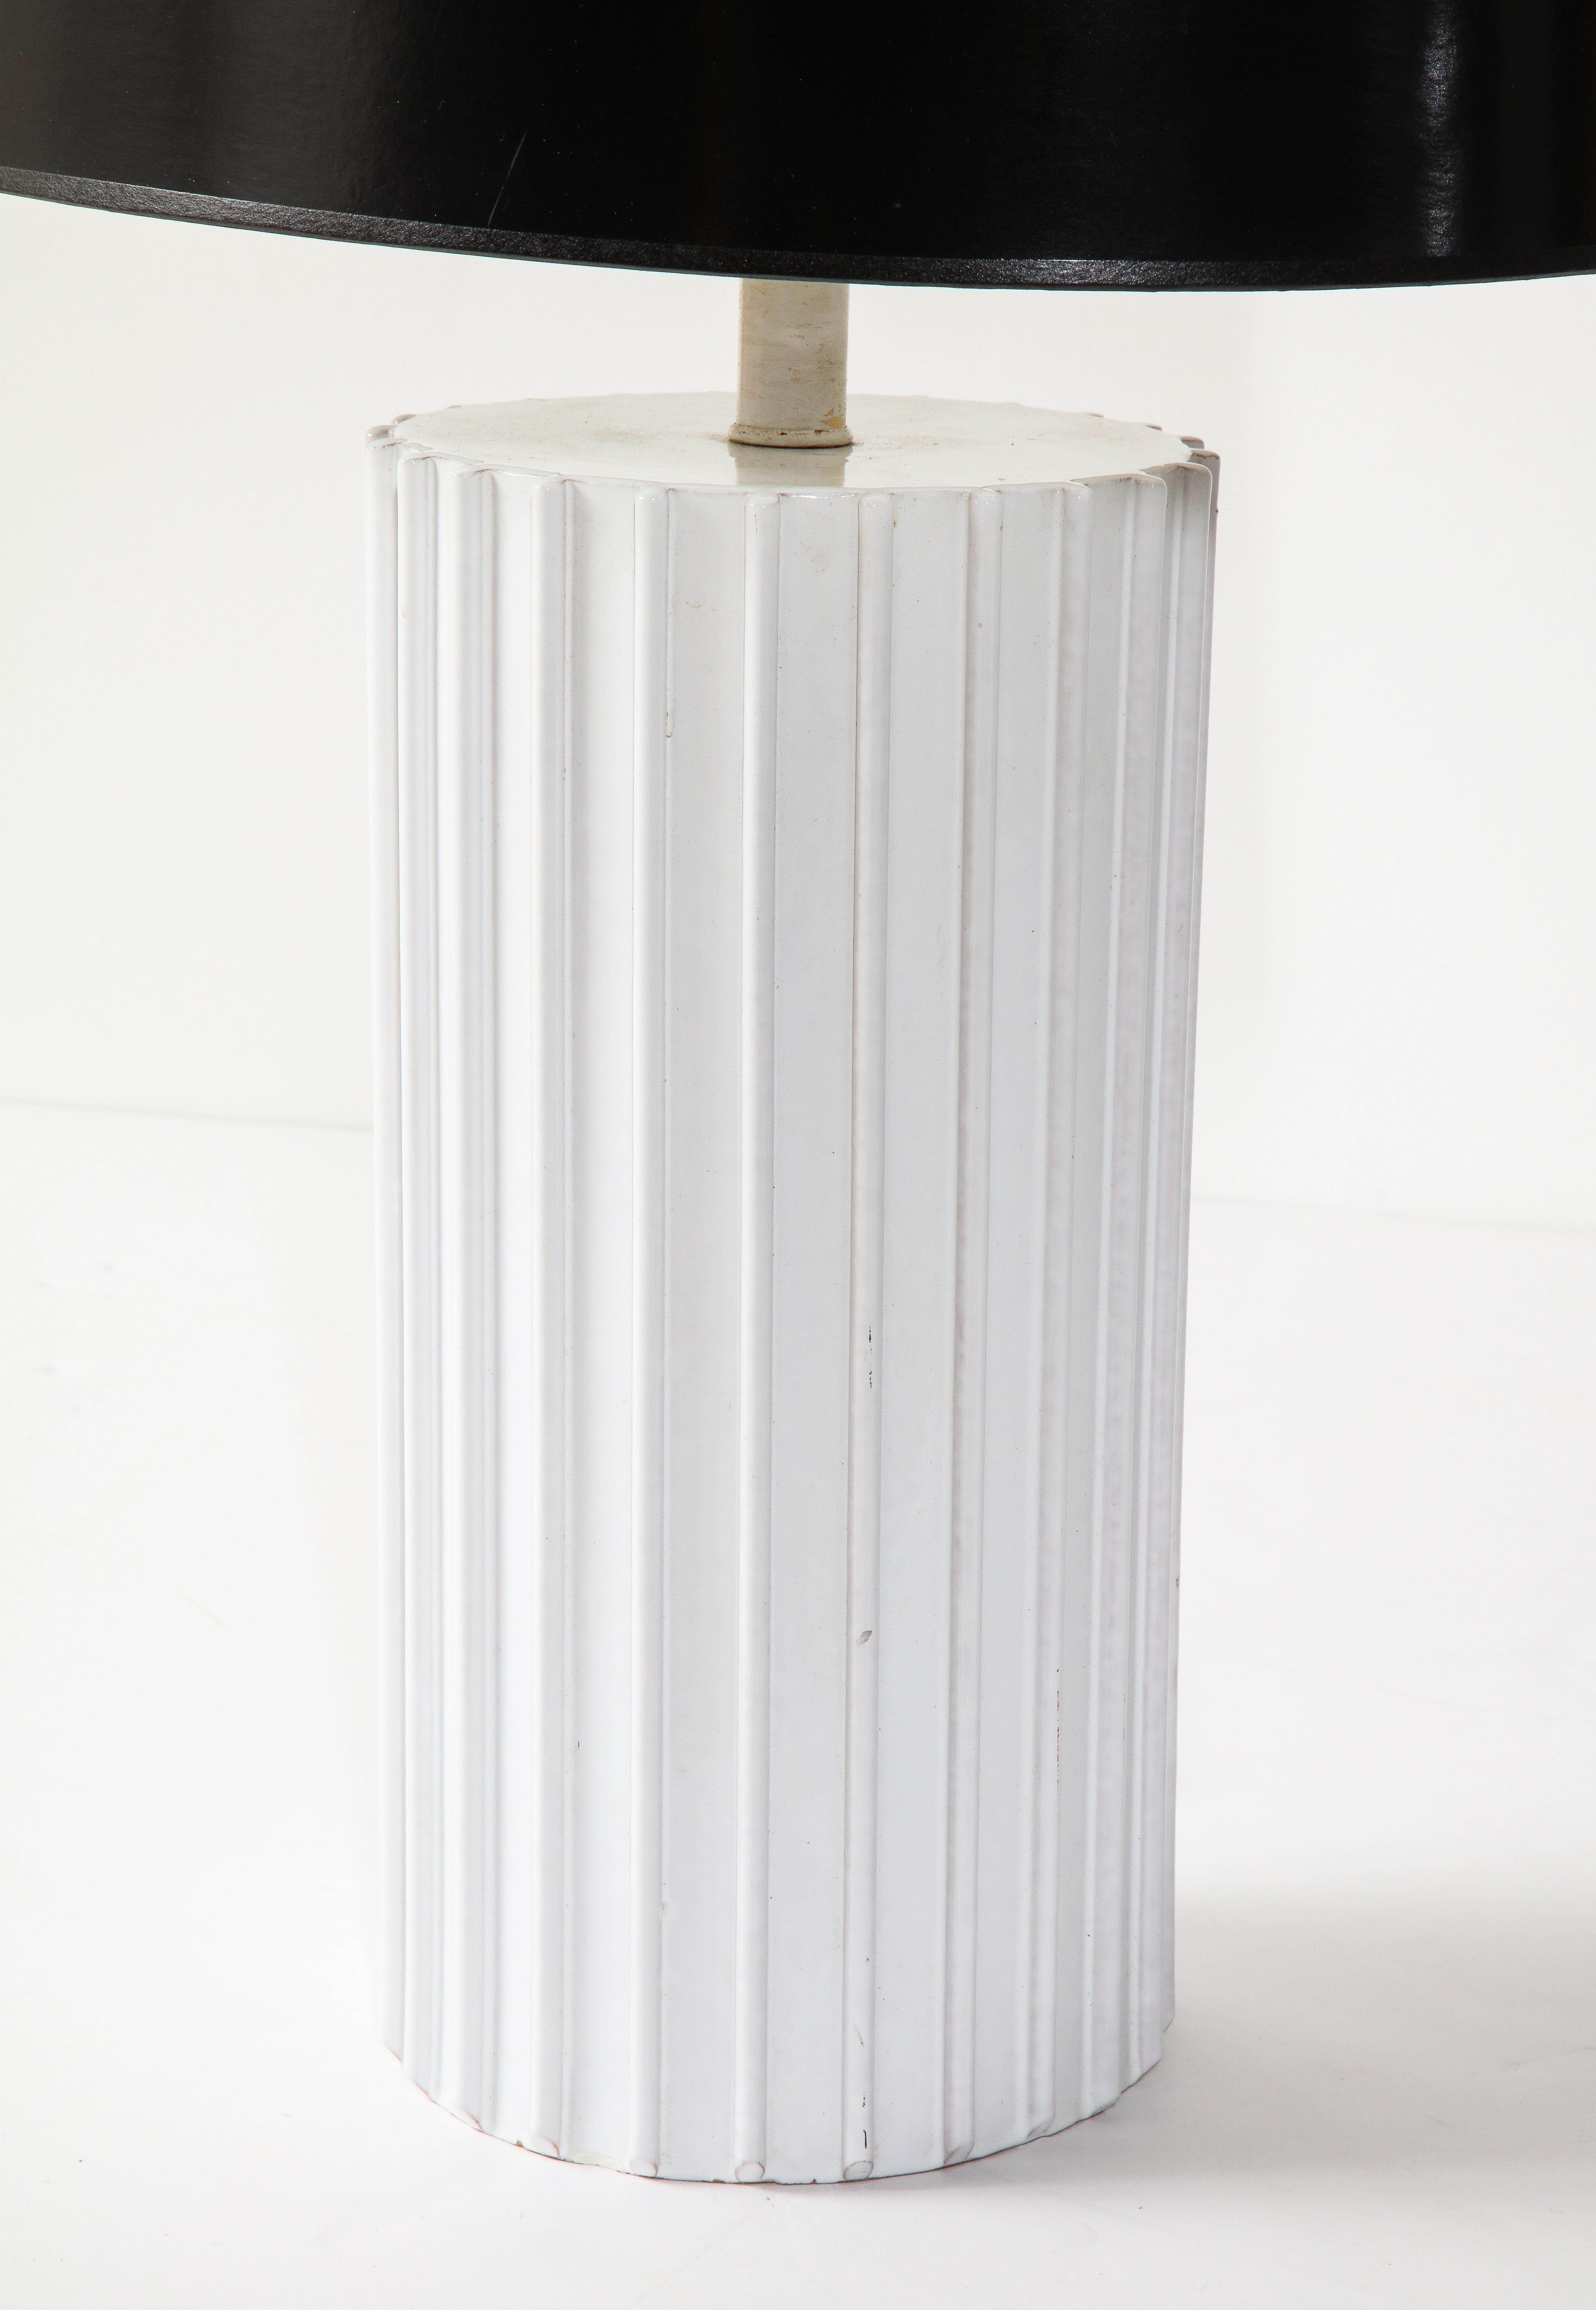 Table Lamp, Ceramic, White, Midcentury, Tall White Ceramic Lamp, C 1960, Lamp In Good Condition For Sale In New York, NY